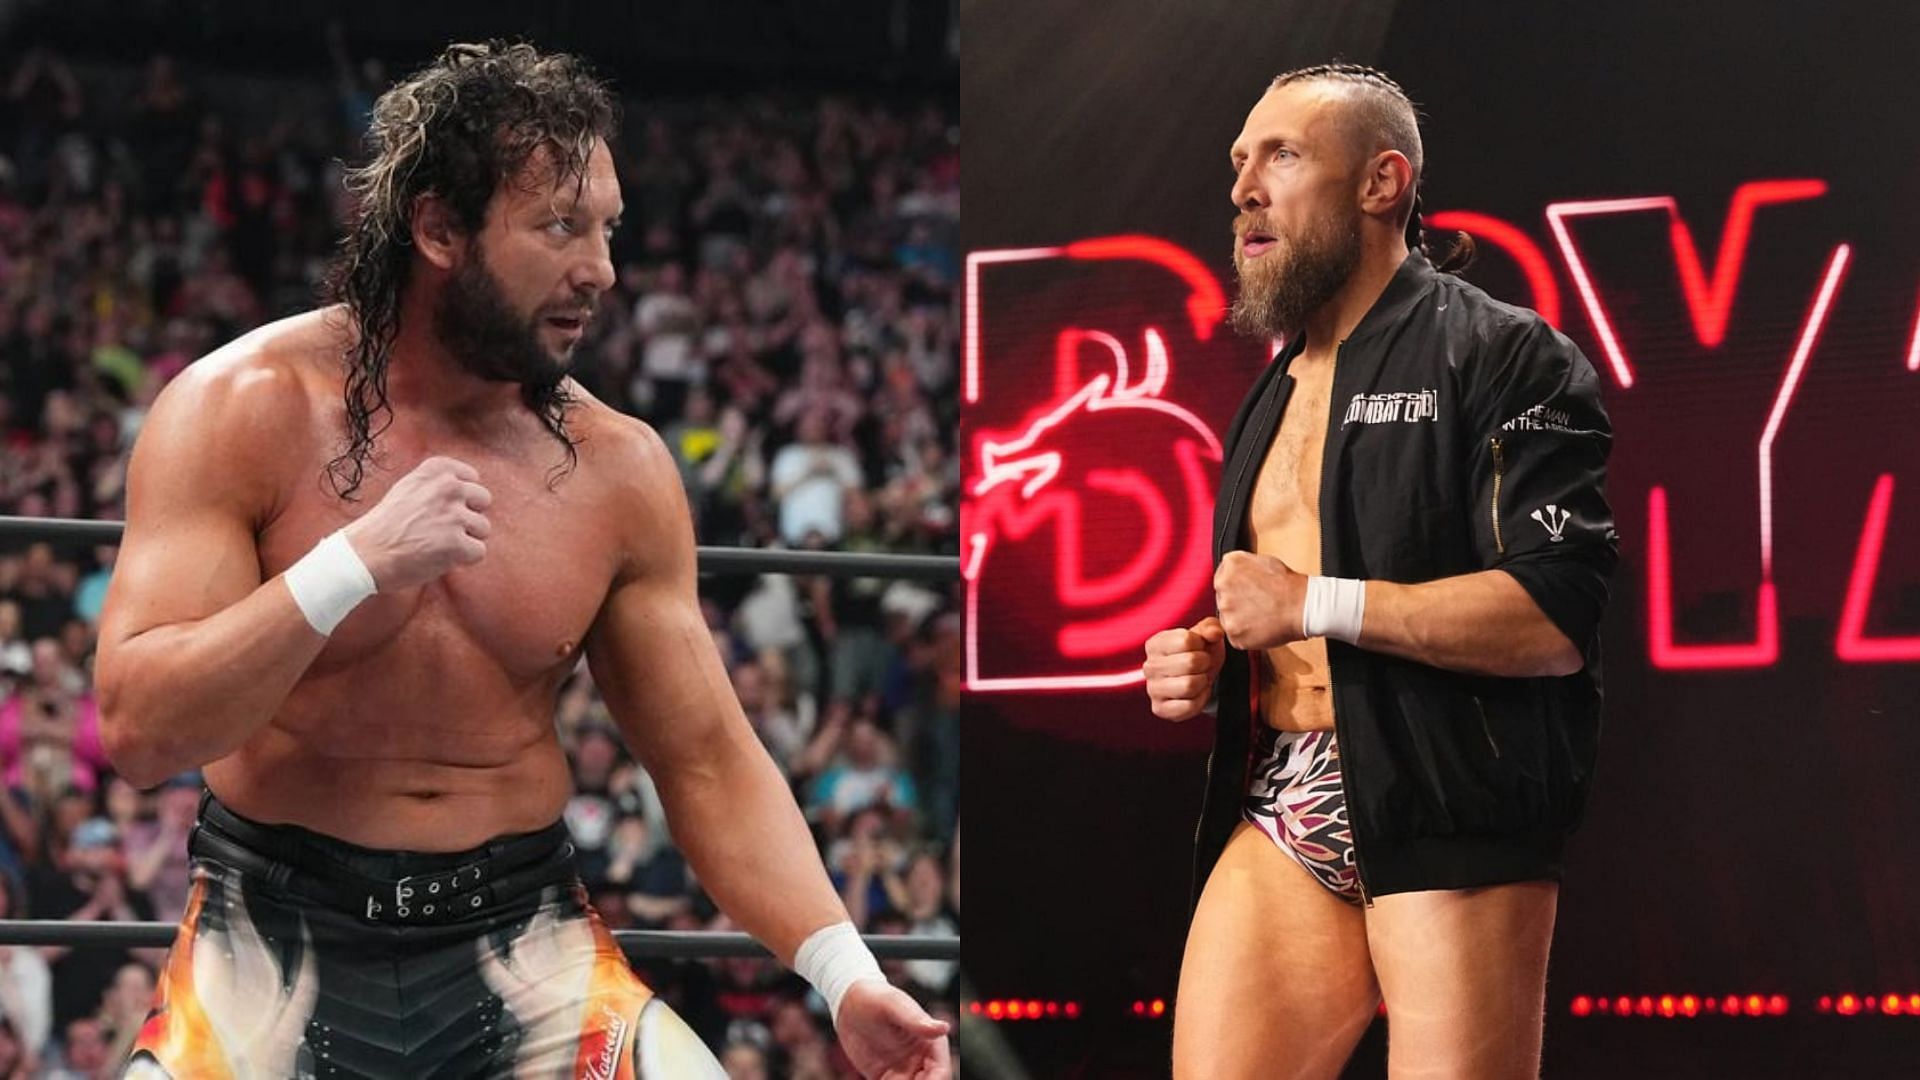 Are Kenny Omega and Bryan Danielson two of the best in AEW?